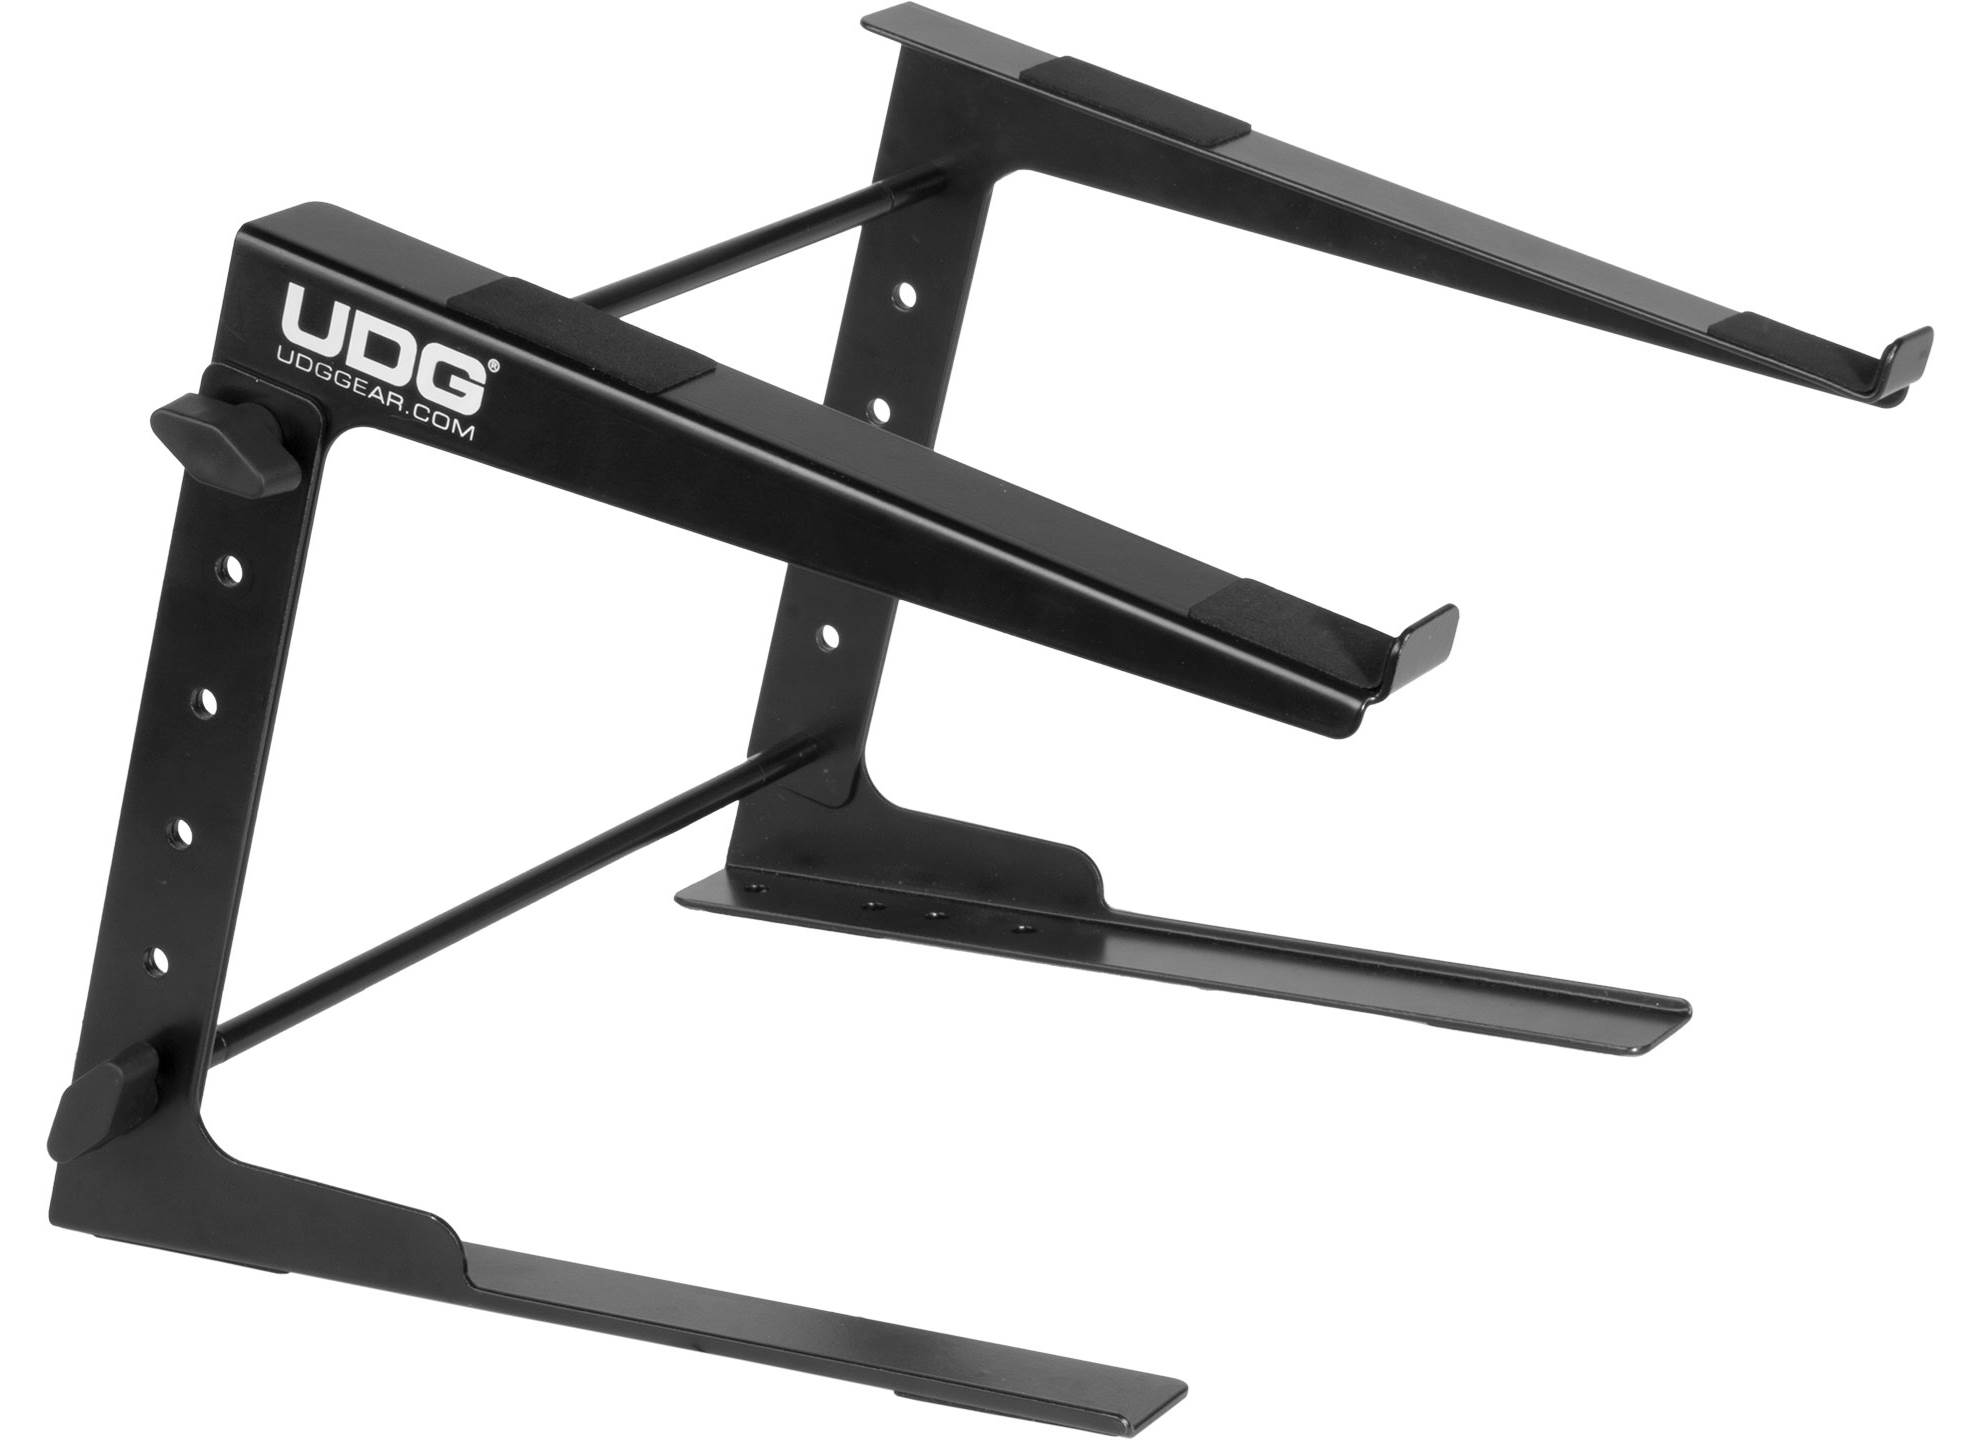 Ultimate Laptop Stand